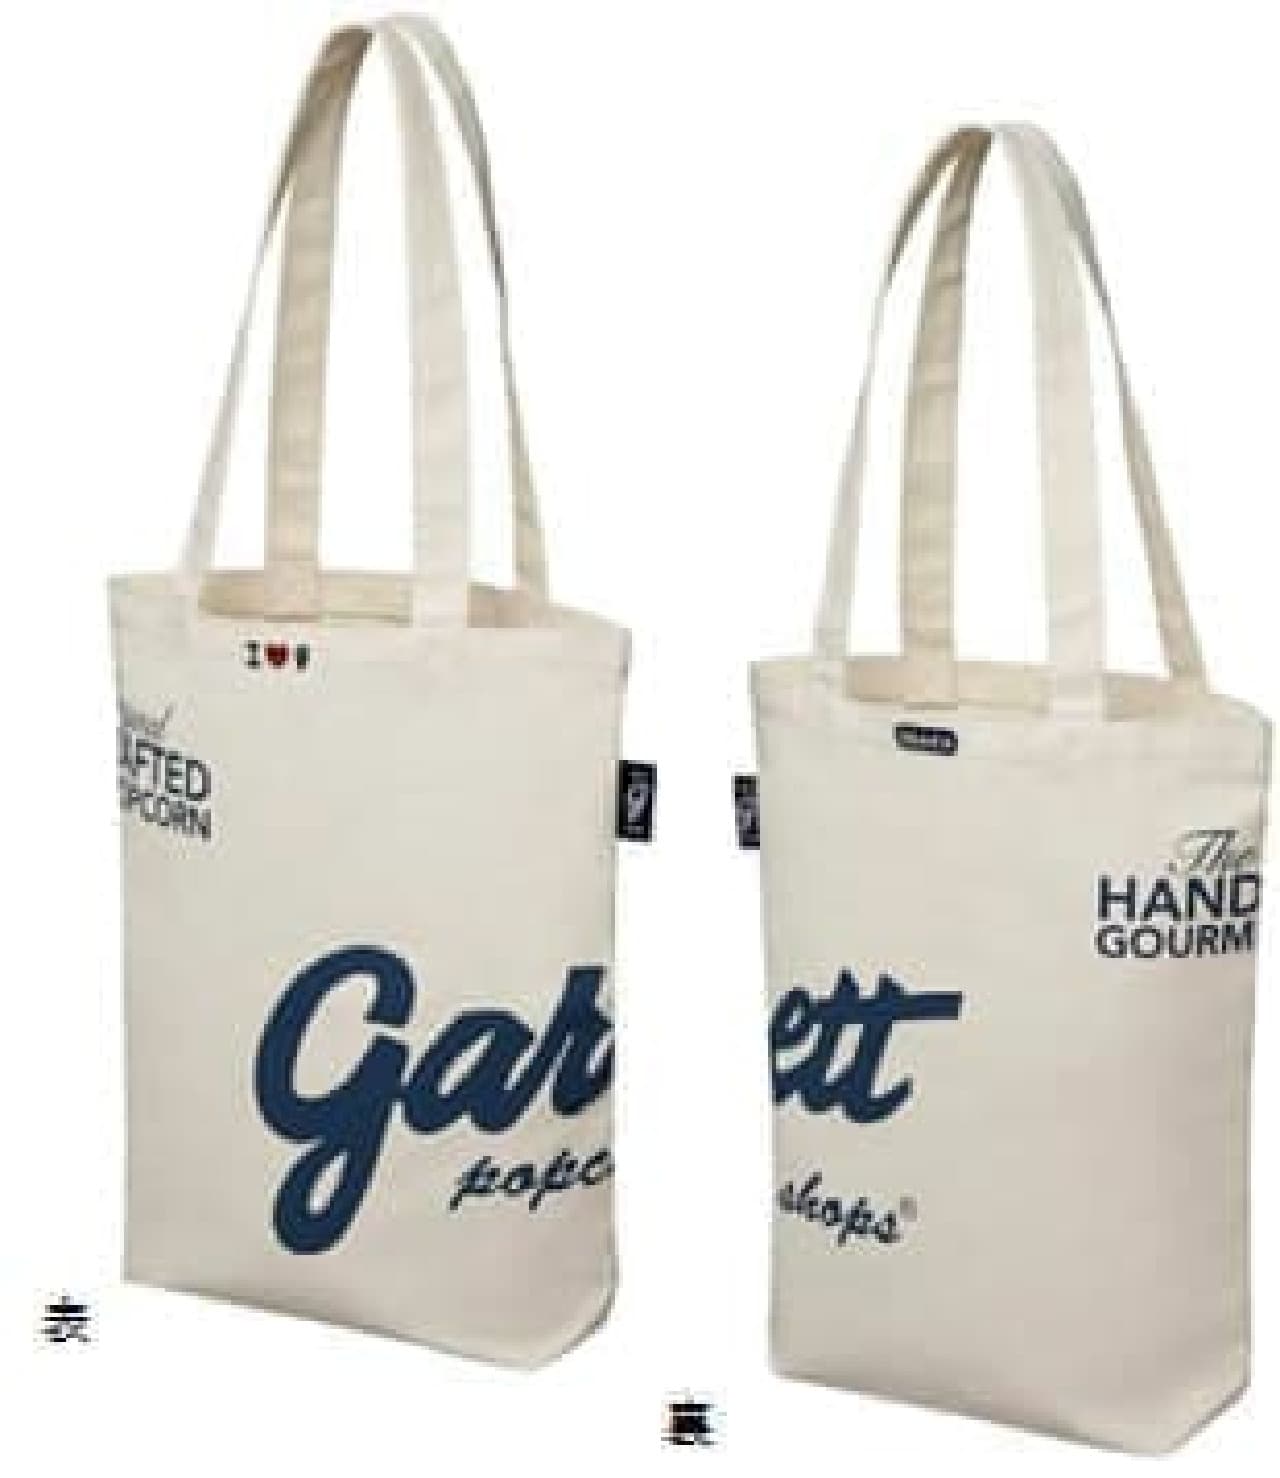 Limited tote with stylish design